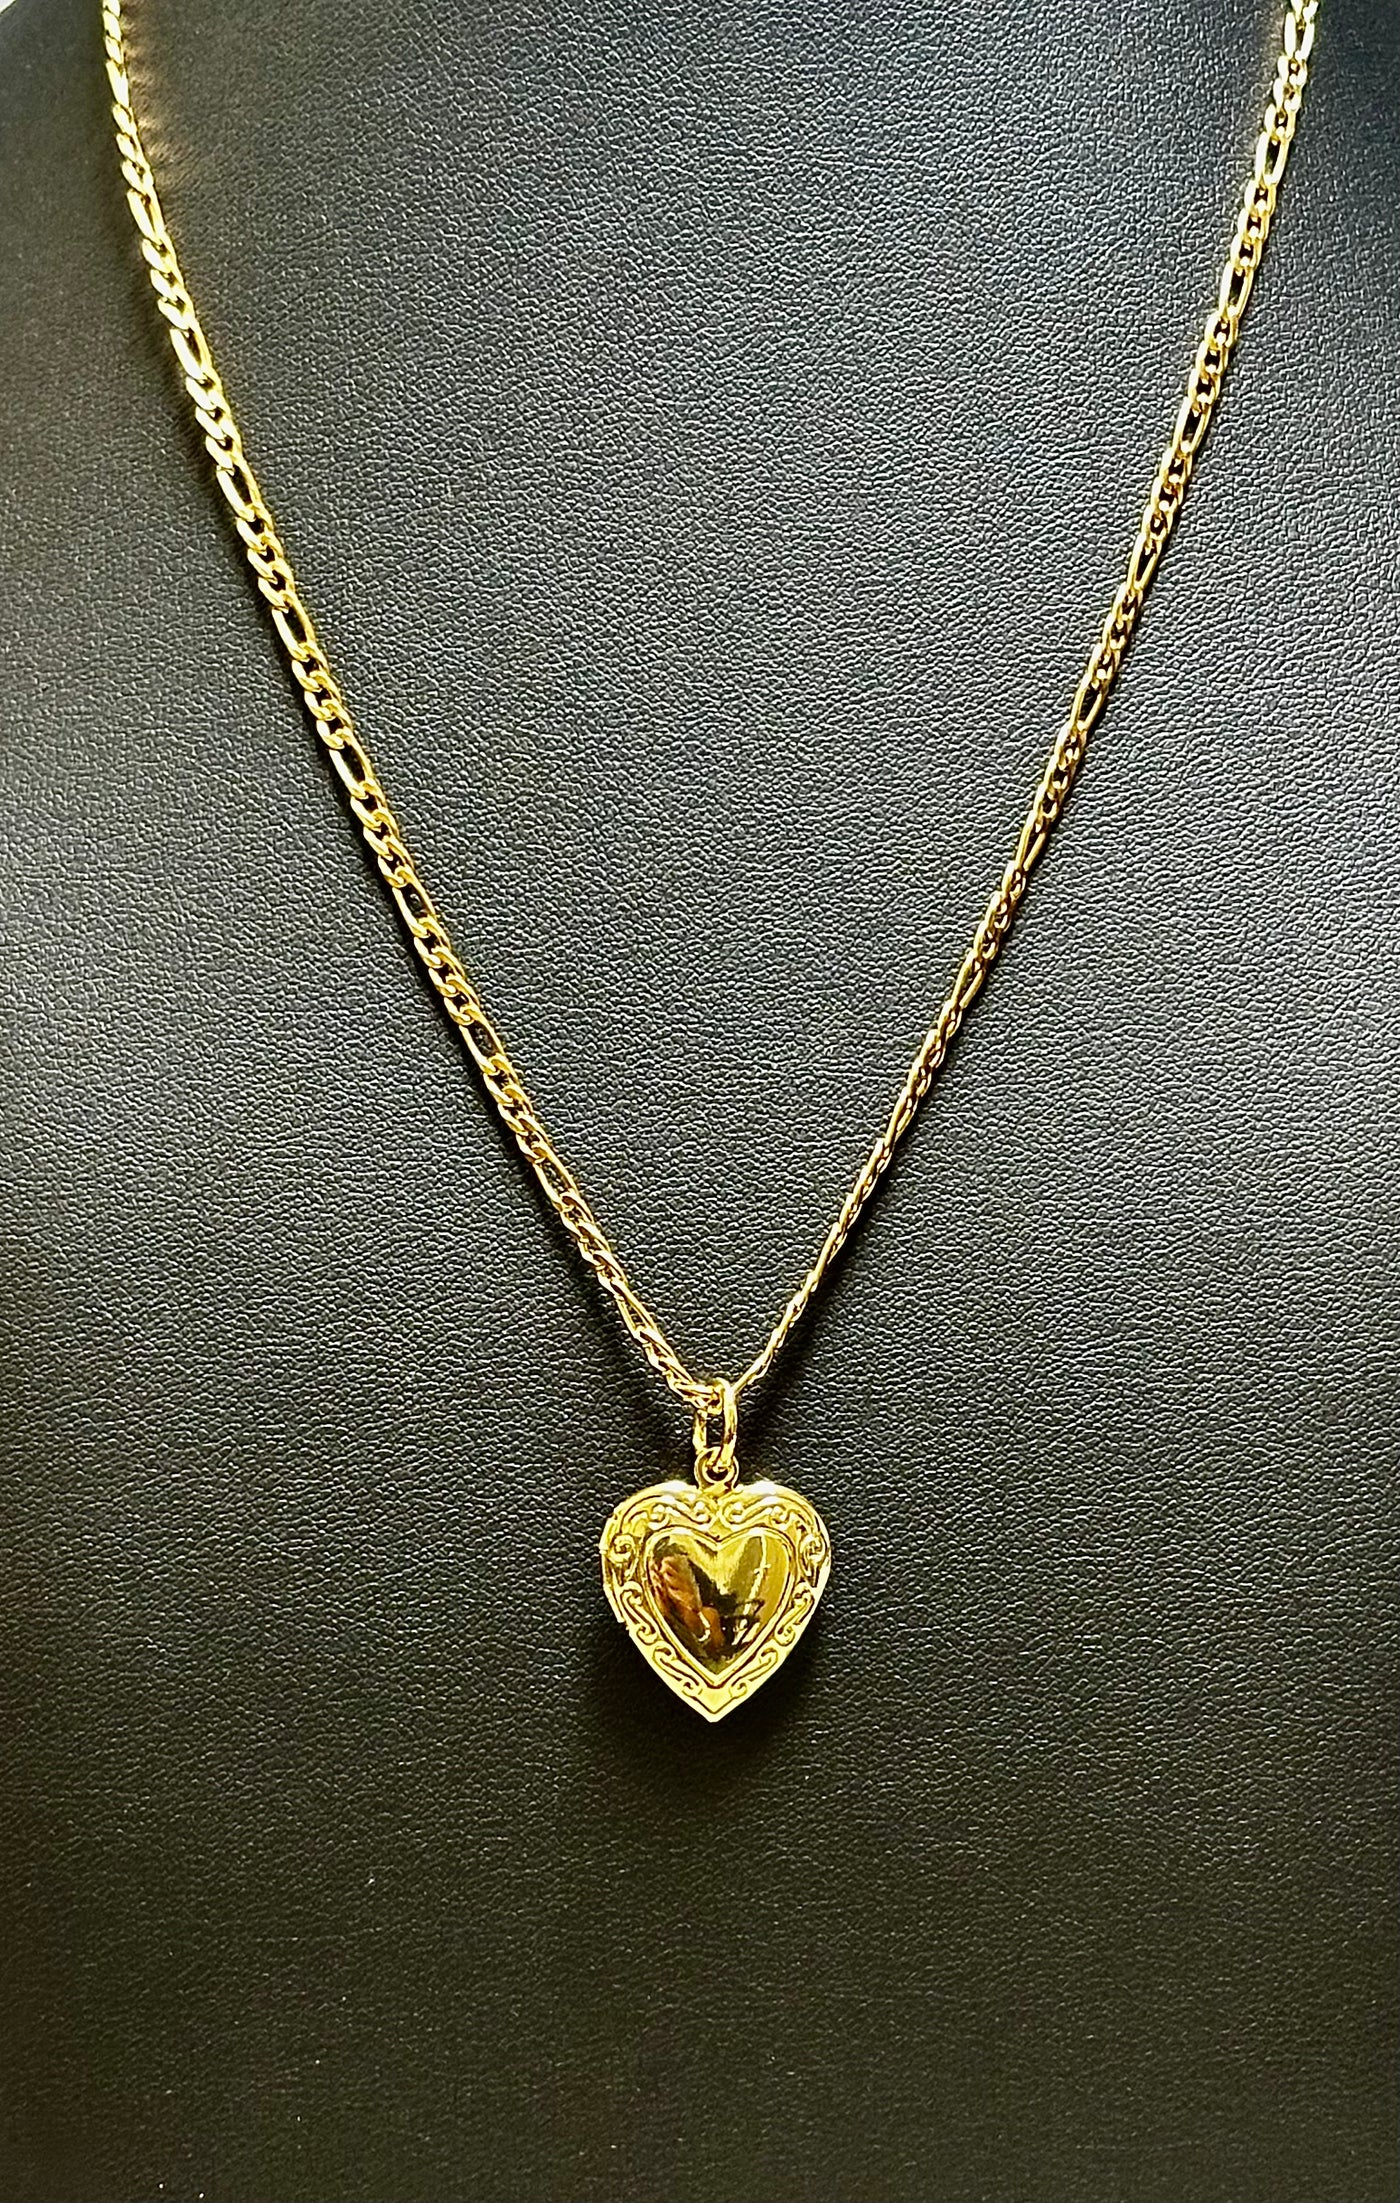 Gold Women's Pendant necklace with Gold Heart Pendant with a Fugaro Chain